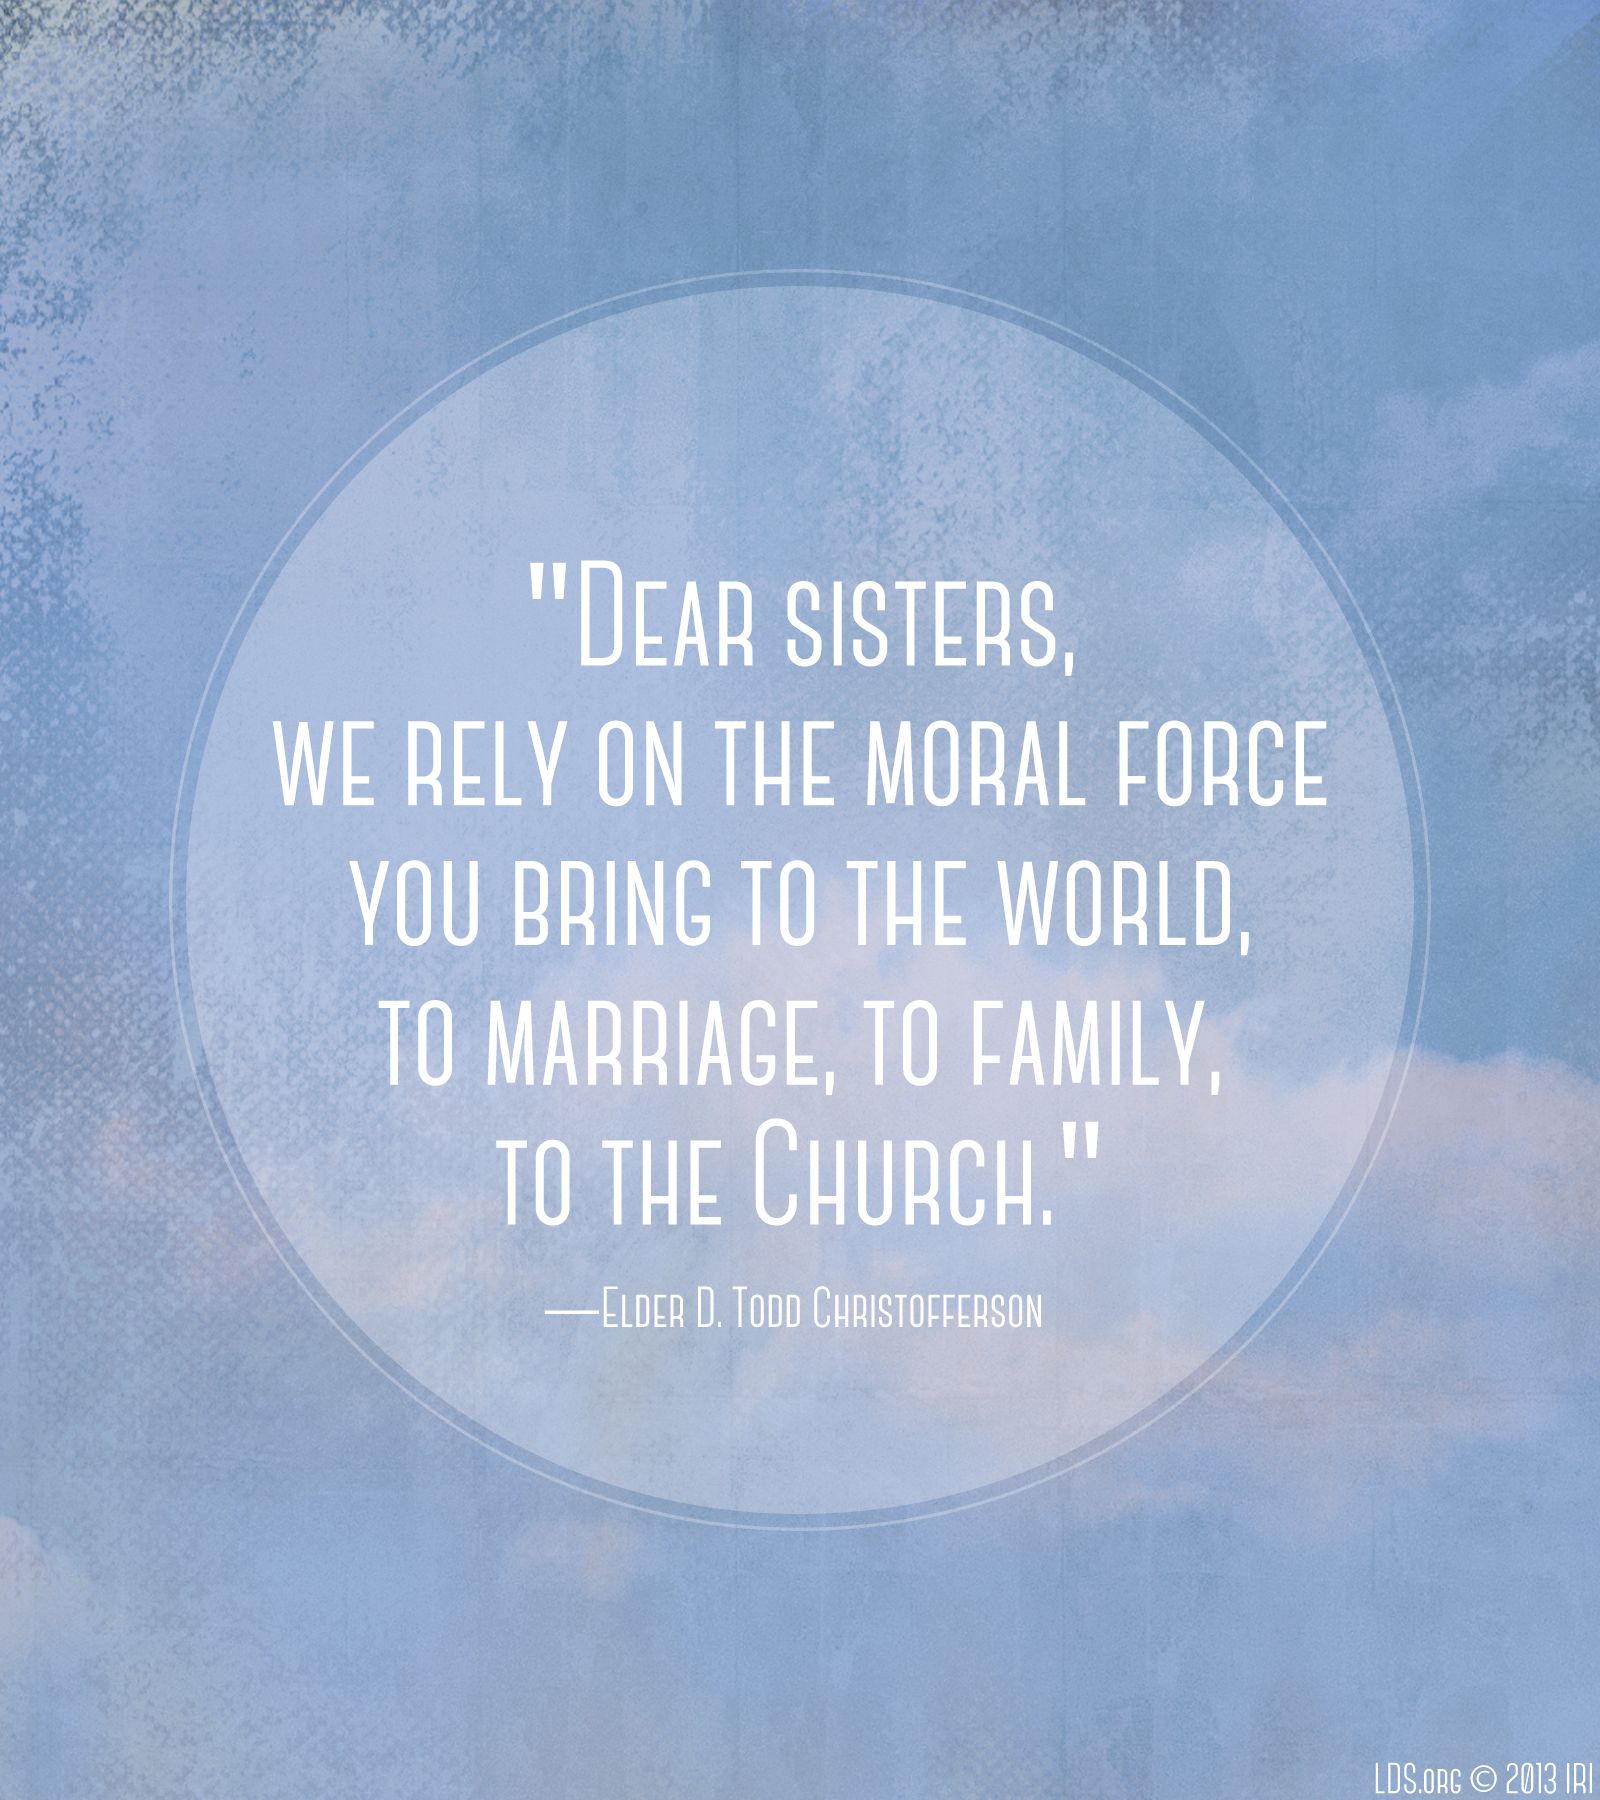 “Dear sisters, we rely on the moral force you bring to the world, to marriage, to family, to the Church.”—Elder D. Todd Christofferson, “The Moral Force of Women”